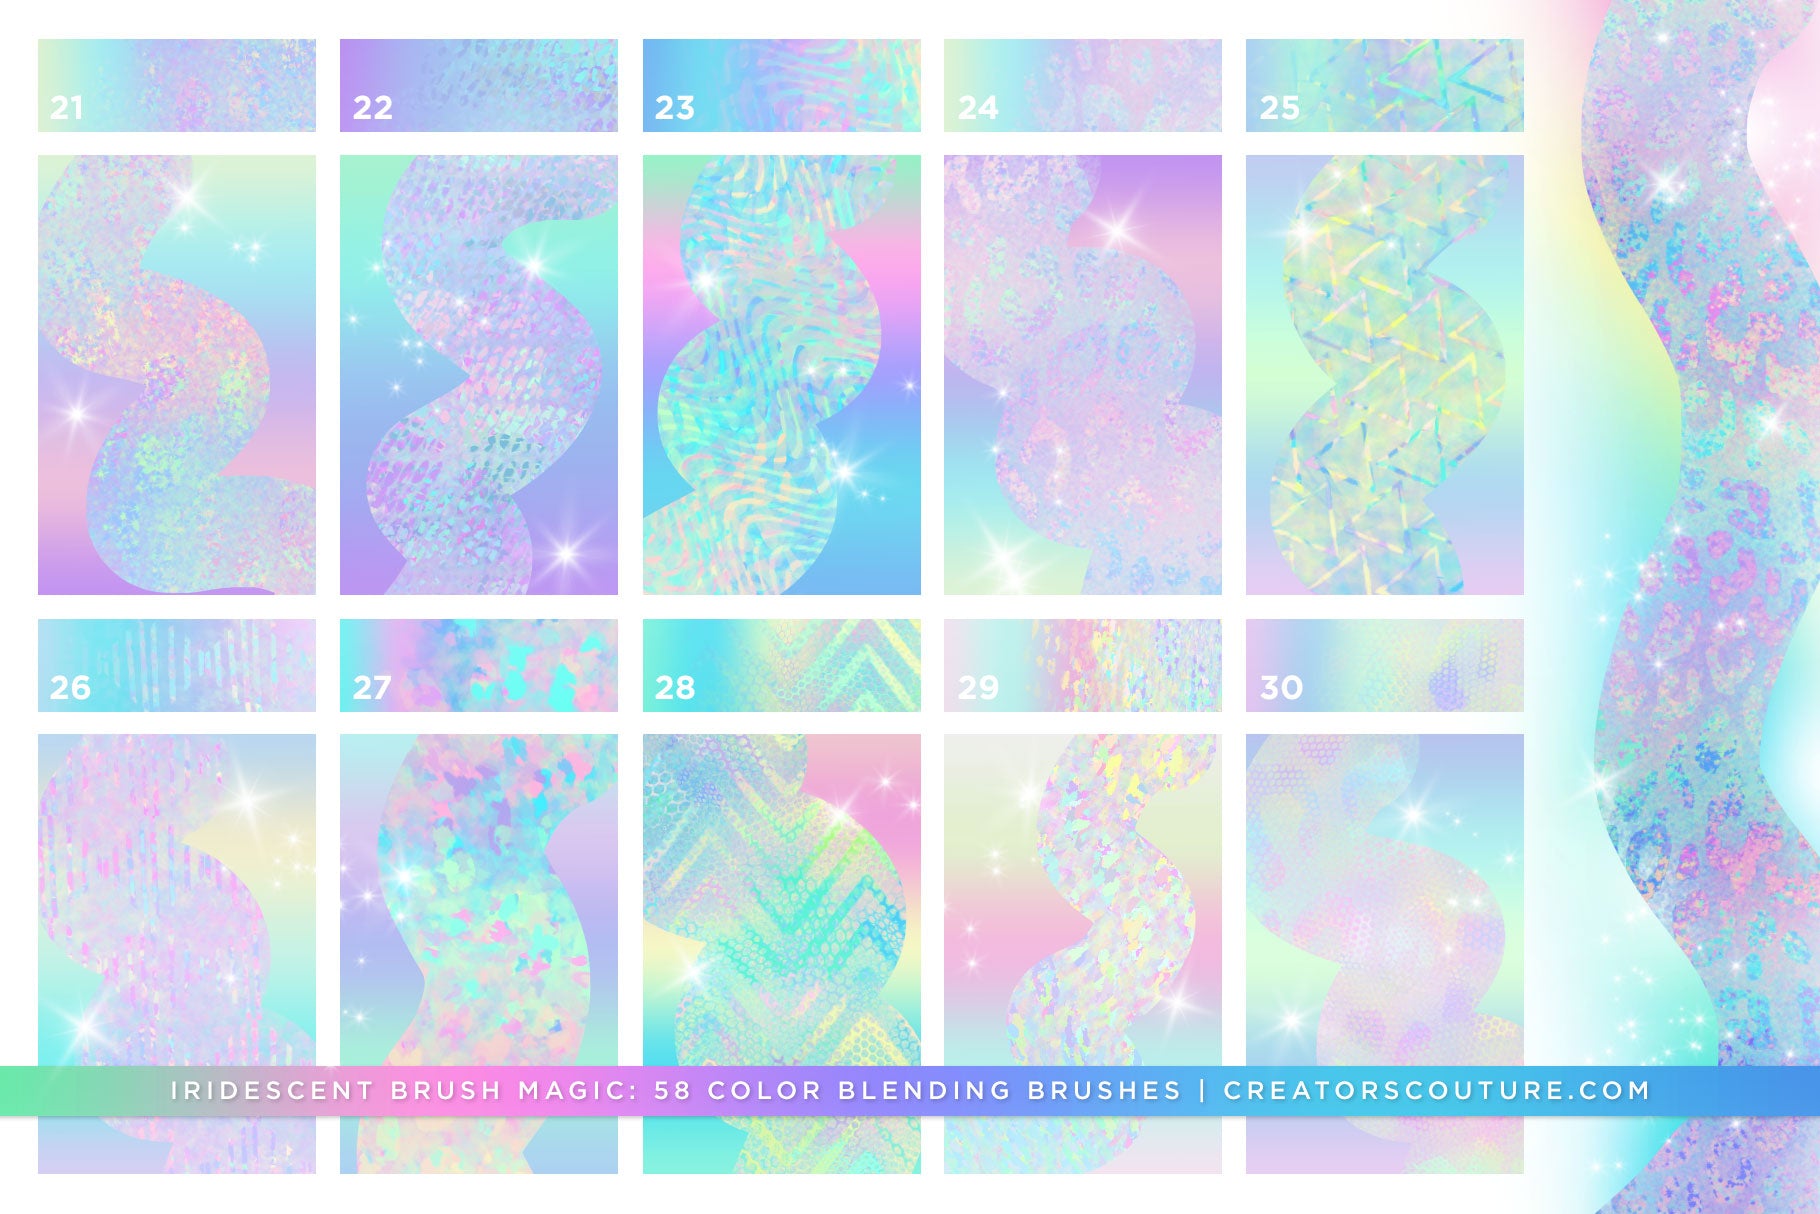 photoshop brushes for instant iridescent and holographic effects and brush strokes, brush preview chart 3